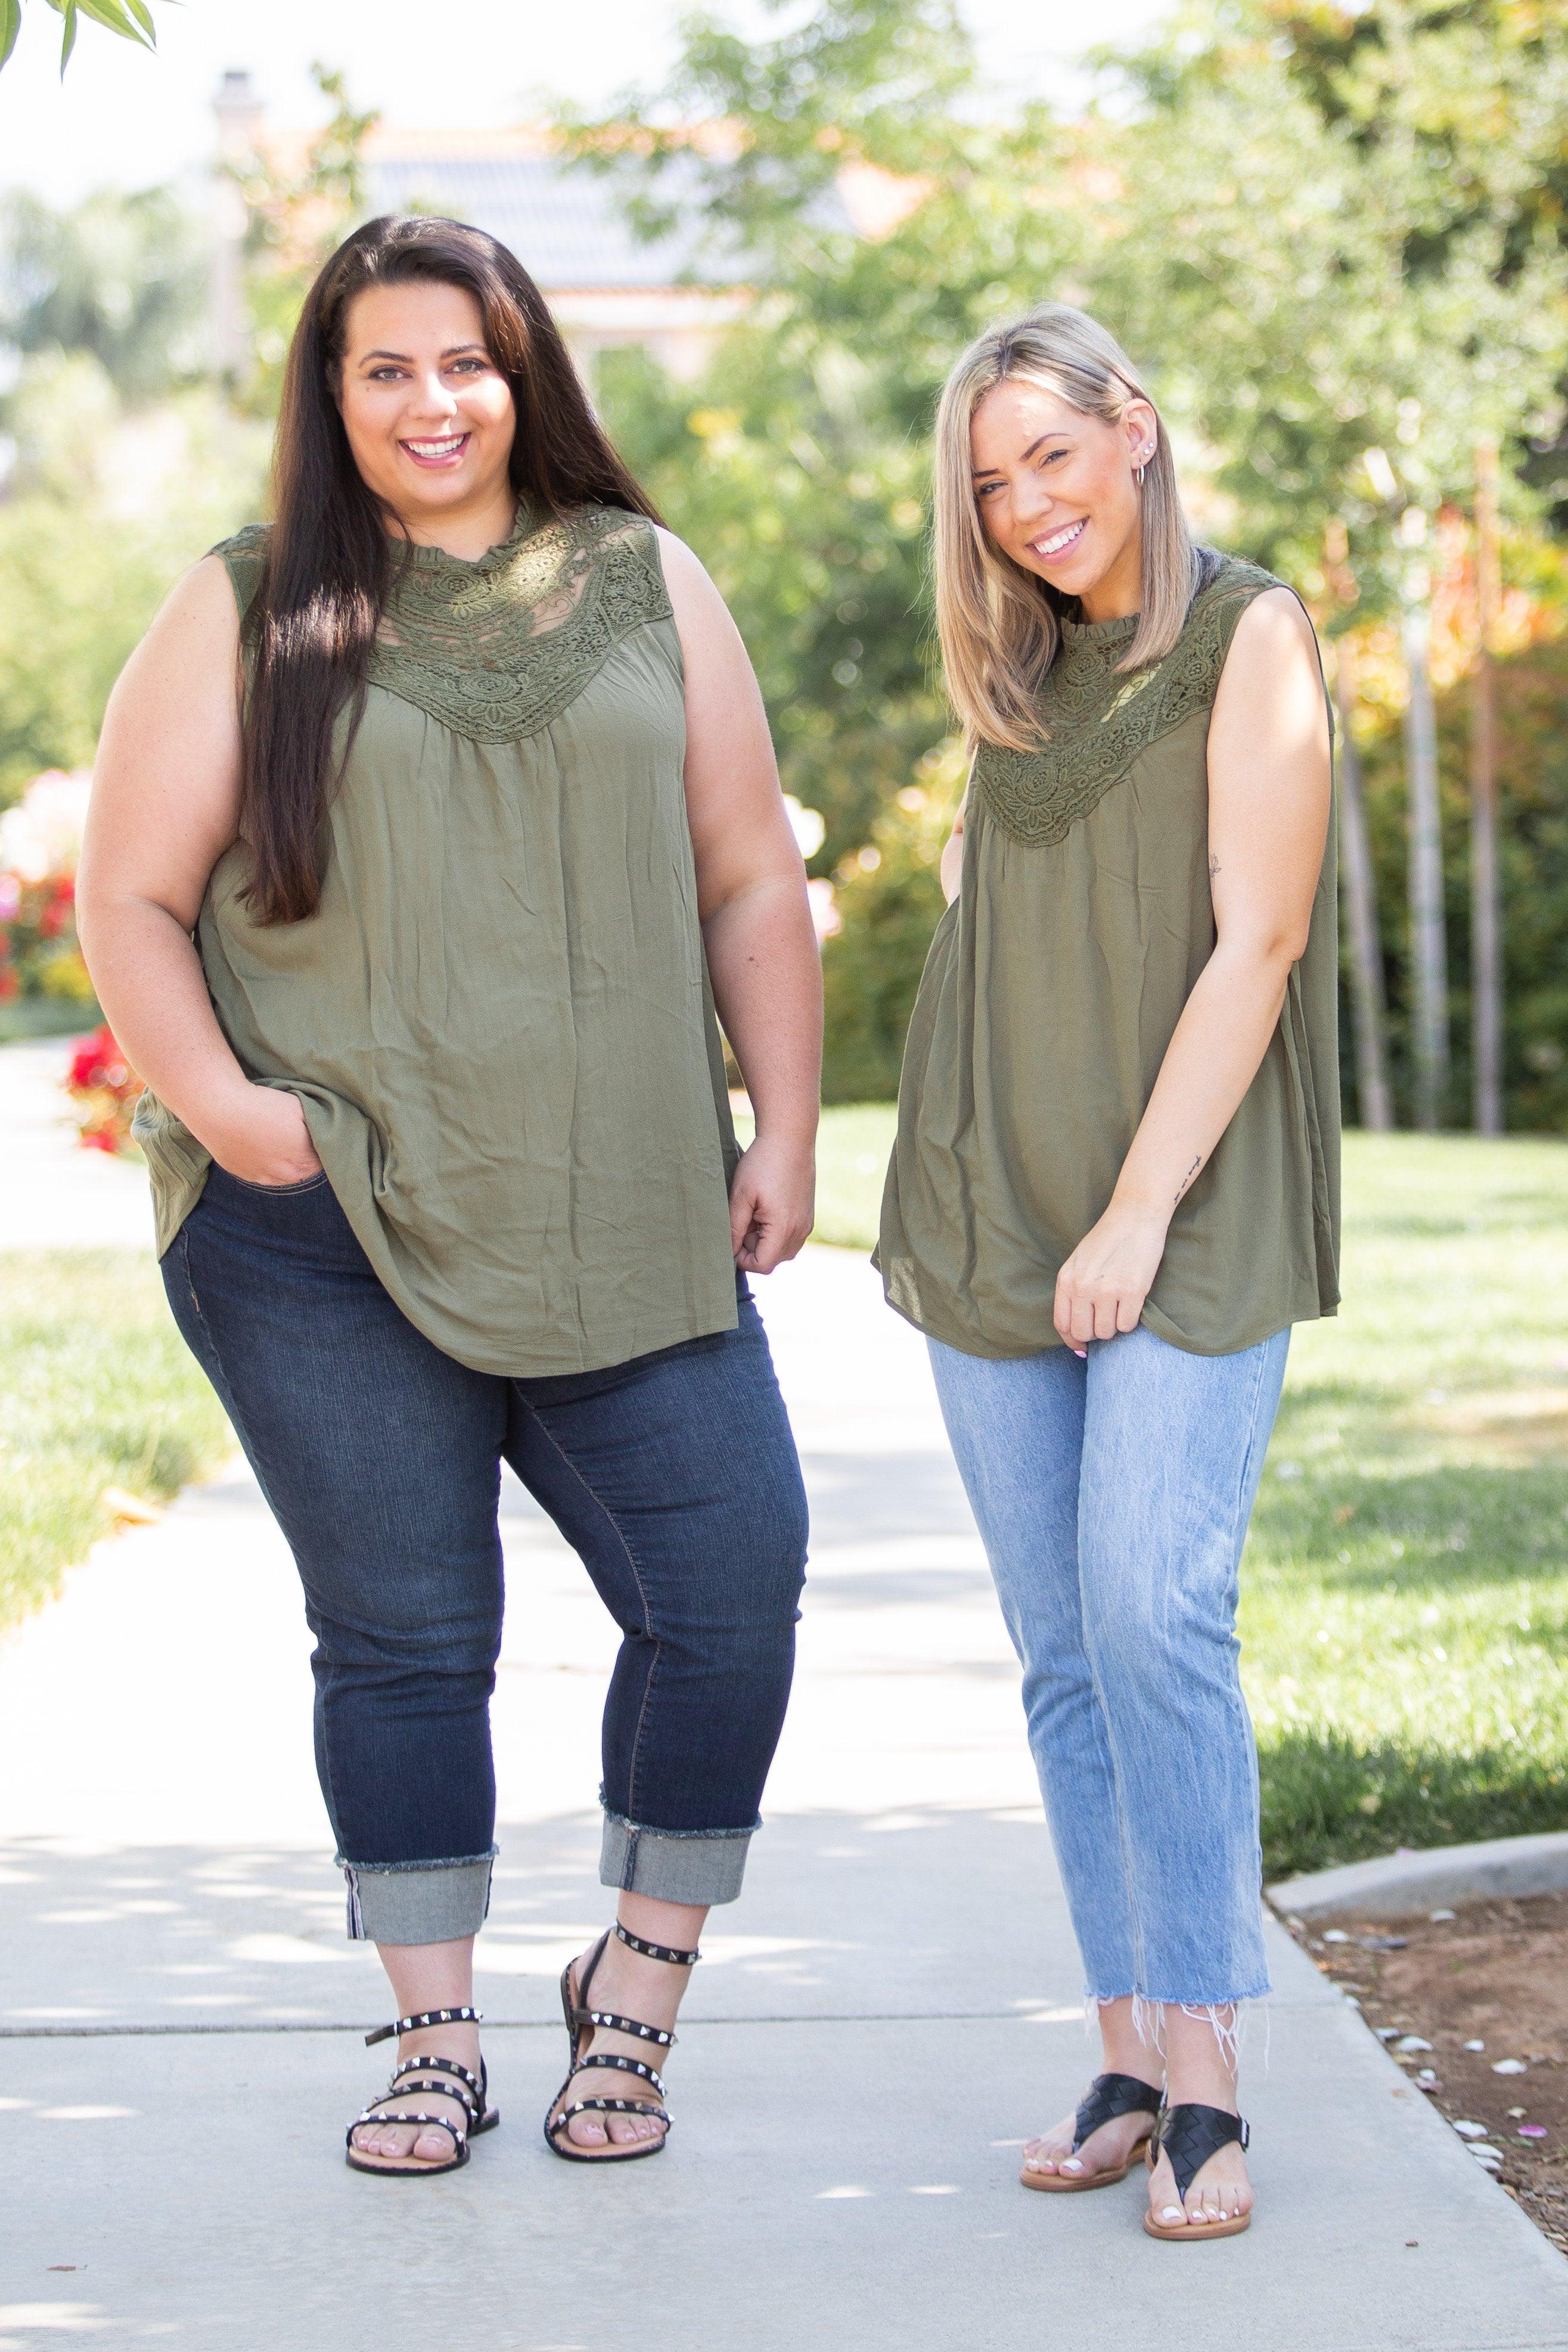 Boho Charm Sleeveless Top in Olive Giftmas Boutique Simplified   